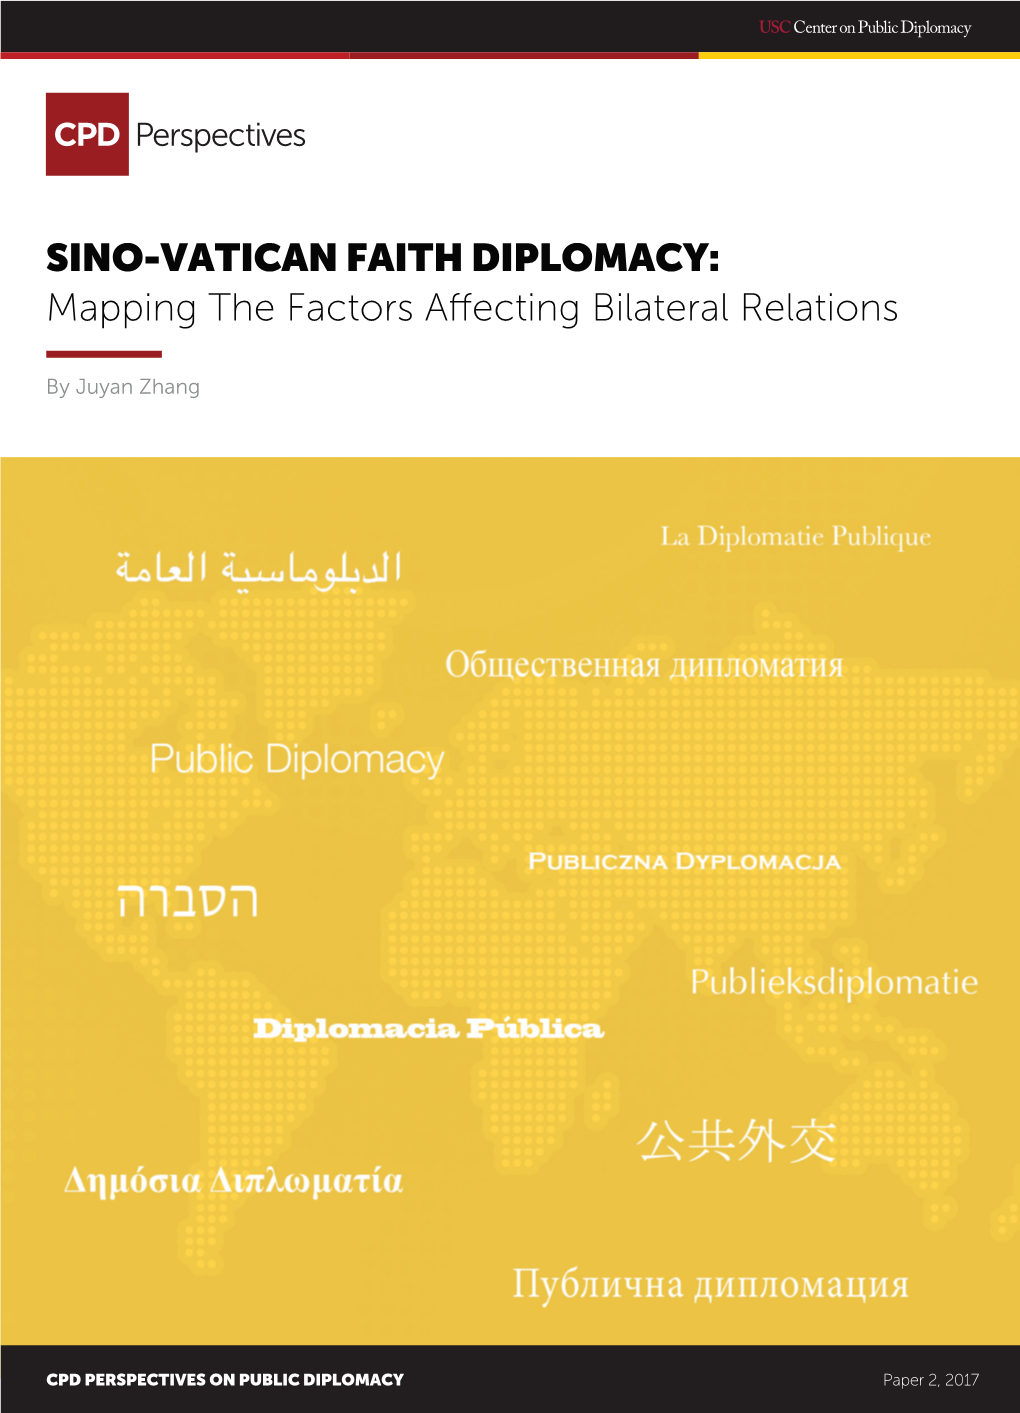 SINO-VATICAN FAITH DIPLOMACY: Mapping the Factors a Ecting Bilateral Relations